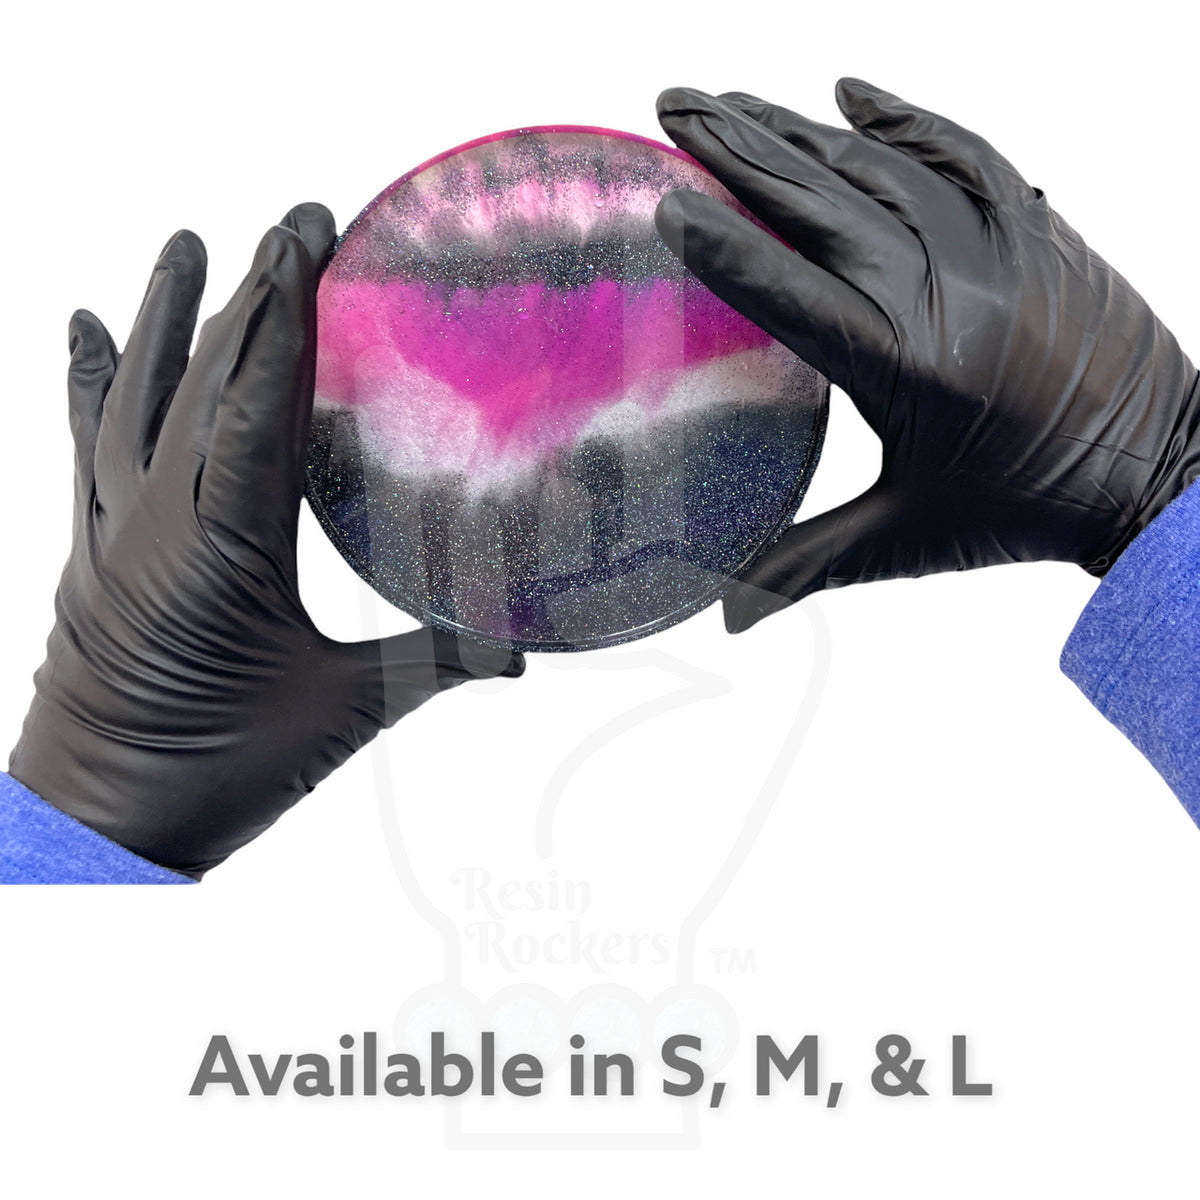 Ms. Mandy&#39;s Famous Heavy Duty Black Nitrile Gloves for Epoxy or UV Resin